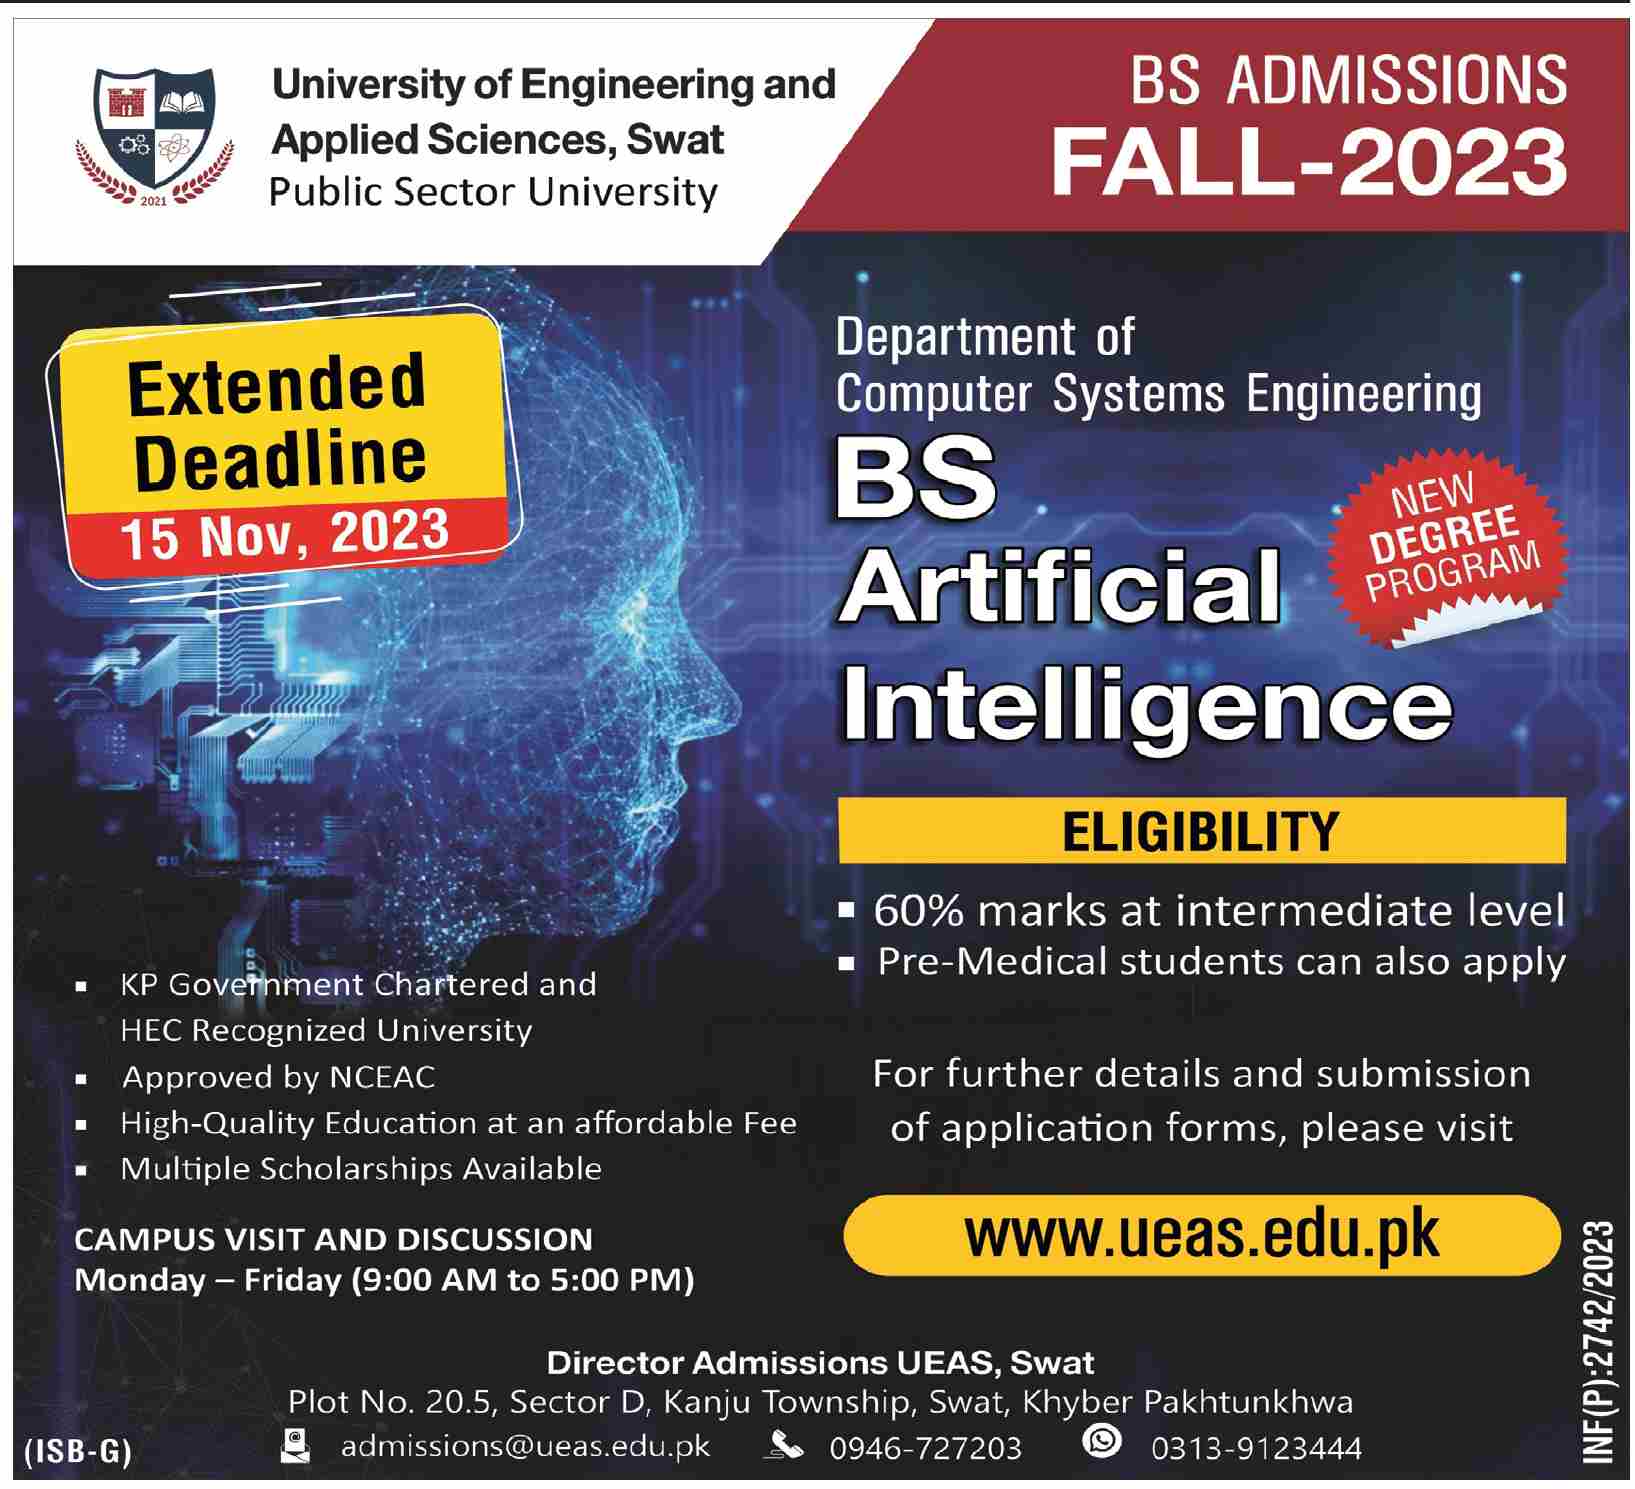 University of Engineering And Applied Sciences Swat BS Admissions Fall 2023